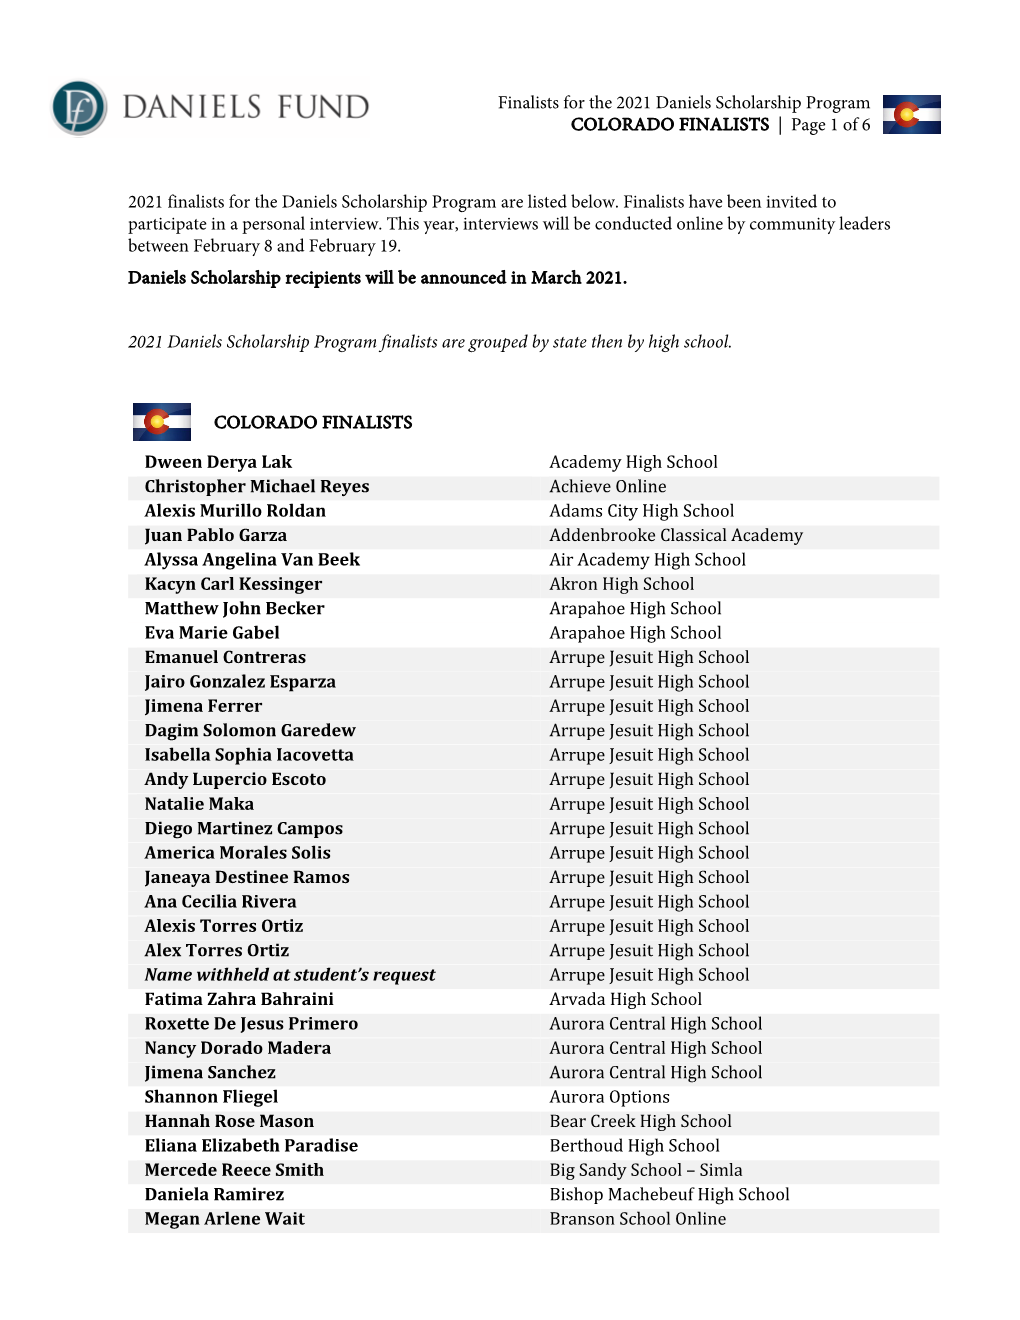 Finalists for the 2021 Daniels Scholarship Program COLORADO FINALISTS | Page 1 of 6